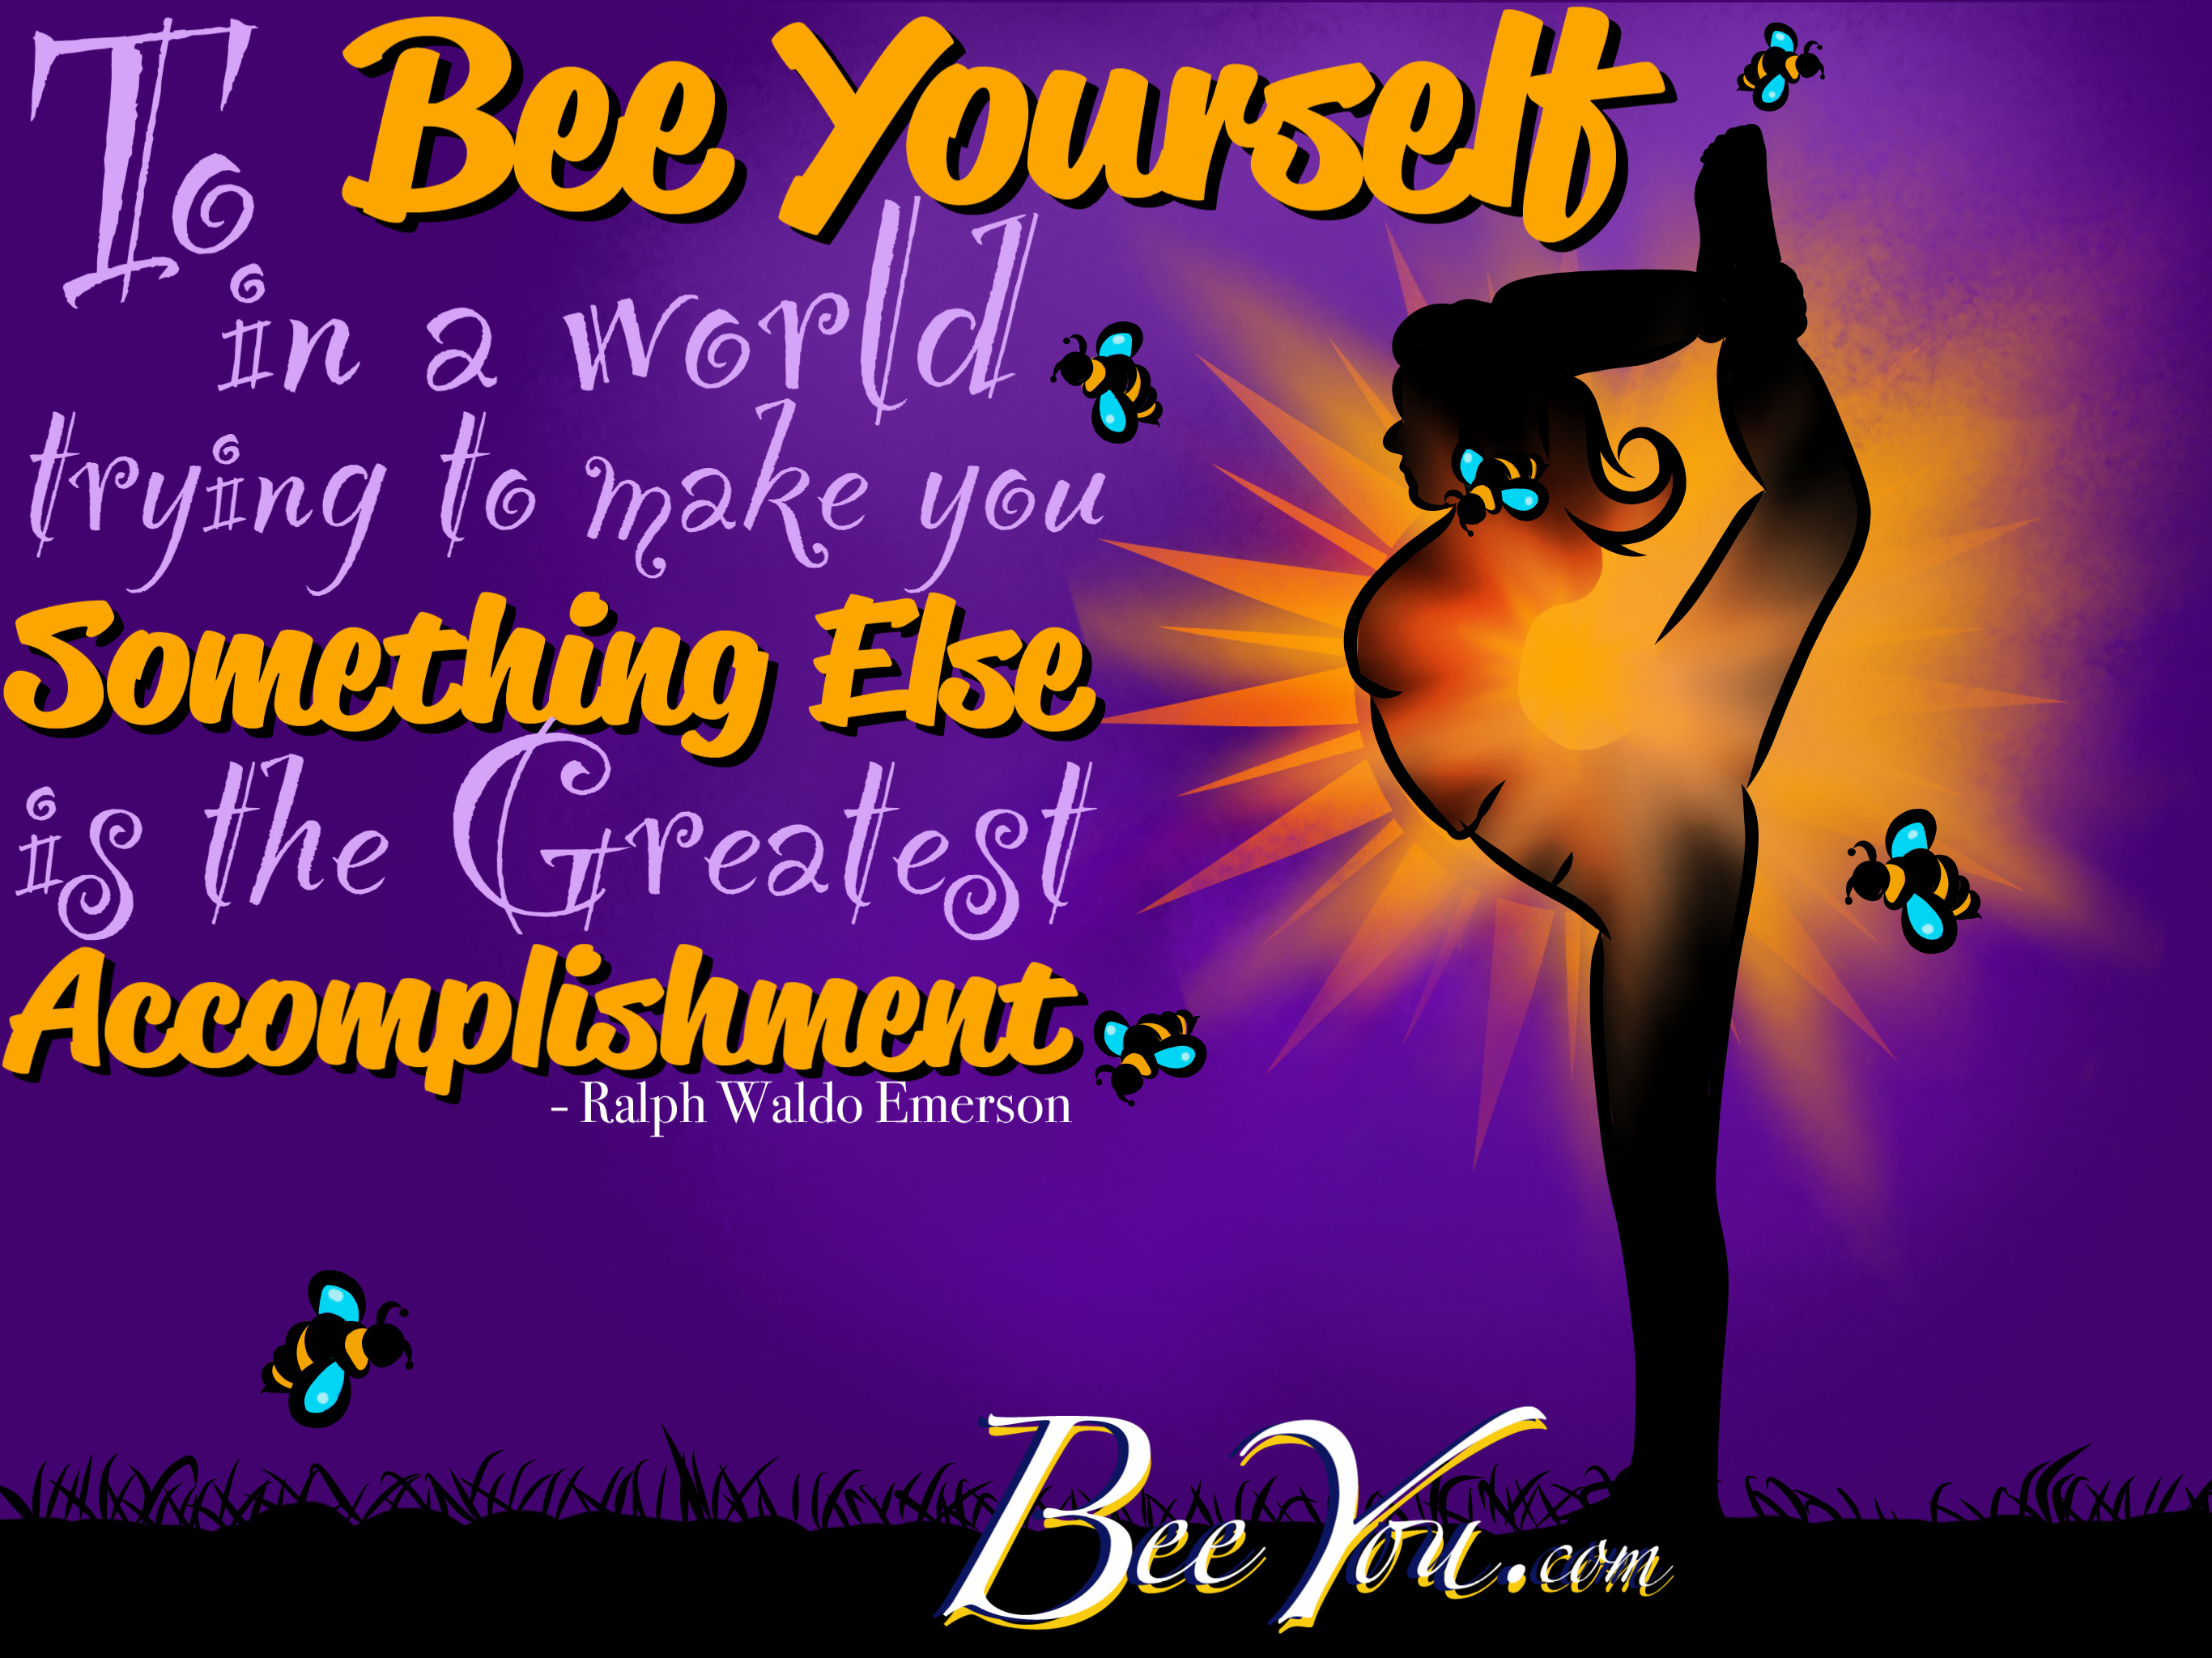 Bee You Yoga and Wellness - Yoga Therapy, Yoga, Yoga for anxiety, Yoga for depression, Yoga for recovery, y12sr, donation based yoga & meditation for everyone, kids yoga, BARRE, Sadie Nardini Yoga Shred Fusion, Full body conditioning, Yoga Nidra, Swedish massage, myofascial release, PSYCH-K, Reiki, BARRE, ZUMBA, Yoga Shred, Bee You Yoga, Yoga 07885, Yoga 07869, Randolph, Roxbury, Mine Hill, New Jersey, North Jersey, Morris County, Yoga Morris County, Buti Yoga, yogassage, theta healing, therapeutic massage, massage gift certifcates, 07803,07806,07847,07802,07869,07876,07852,07856,07850,07885,07845,07801,07970,07857,07843,07836,07834,07842,07926,07950,07878,07945,07849,07874,07837,07866,07930,07828,07046,07963,07962,07927,07960,07821,07005,07981,07054,07924,07961,07820,07034,07840,07438,07931,07976,07977,07871,07879,07934,07939,07045,07870,07853,07940,07935,07932,07936,07839,07082,07058,07405,07439,07979,07933,07920,07946,07980,07938,07928,07880,07435,08858,07830,07039